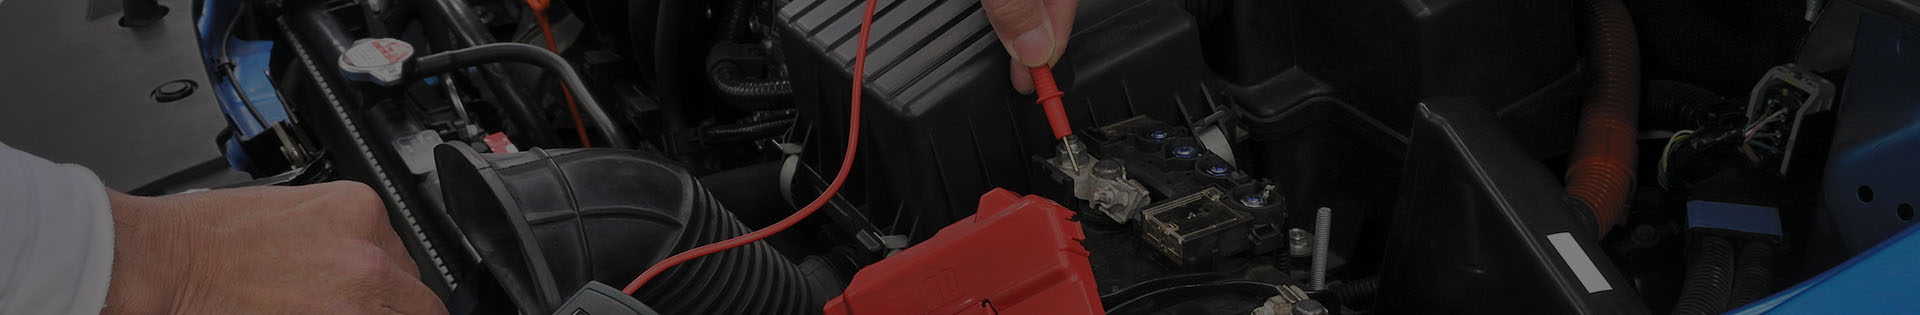 Auto Blower Motor Resistor Replacement in Albany, CA - Adams Autoworx Albany